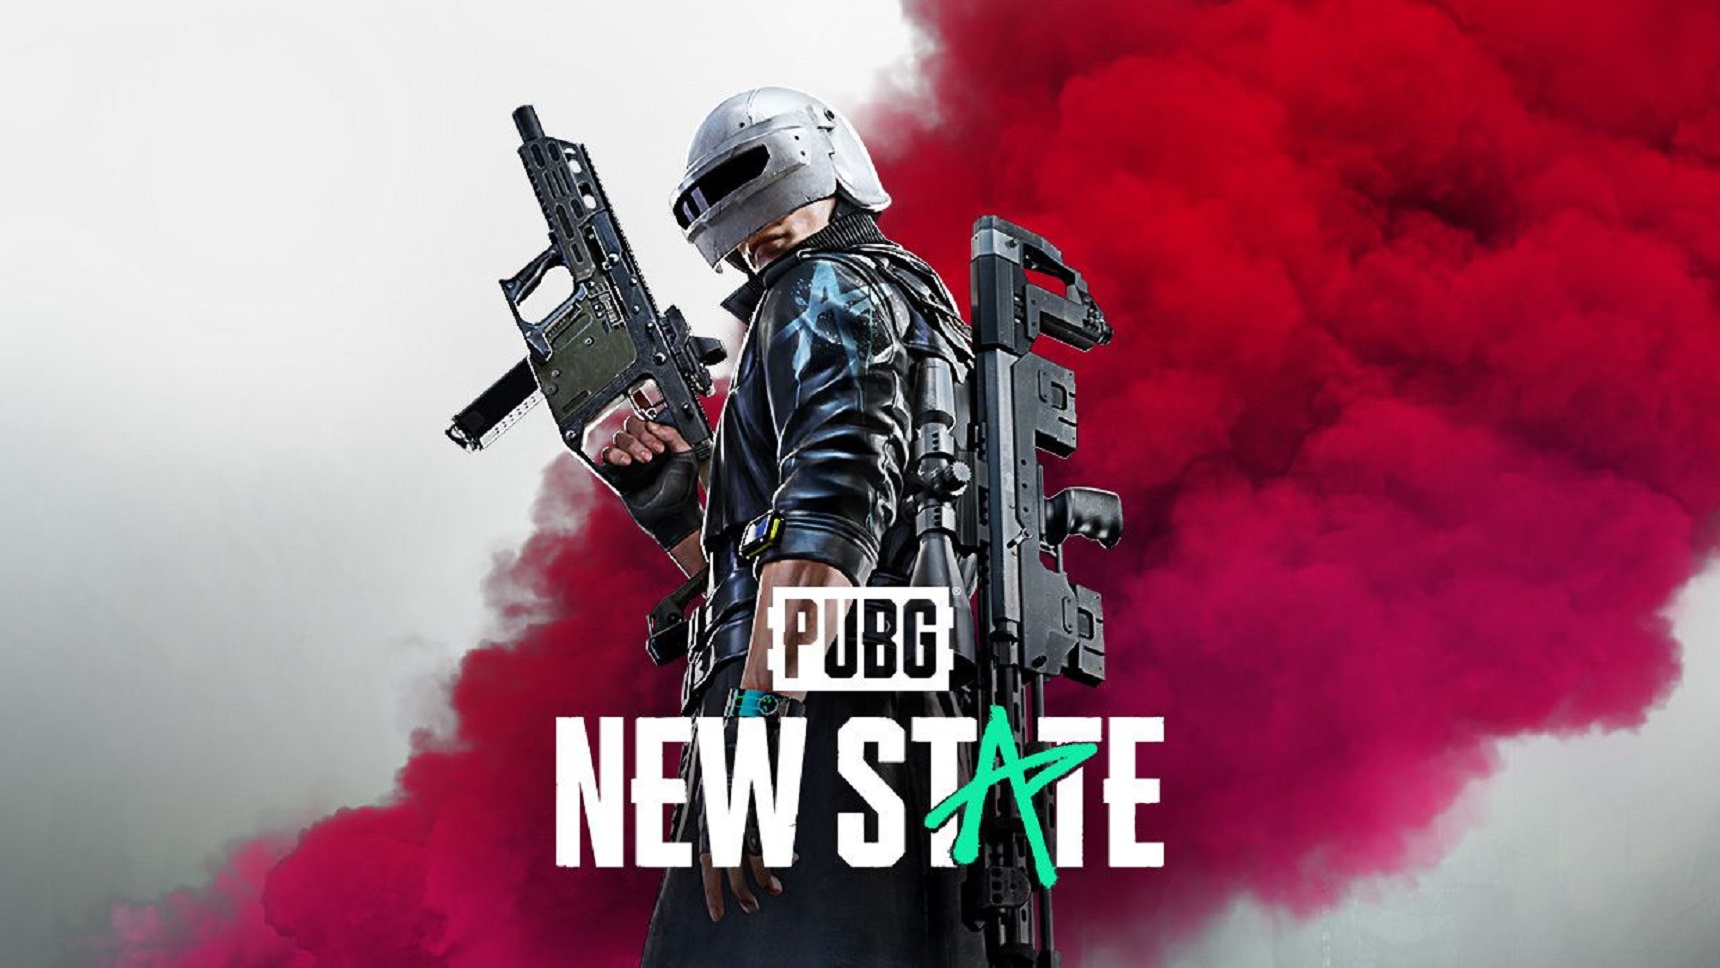 Download PUBG NEW STATE MOD APK 0.9.44.398 Android